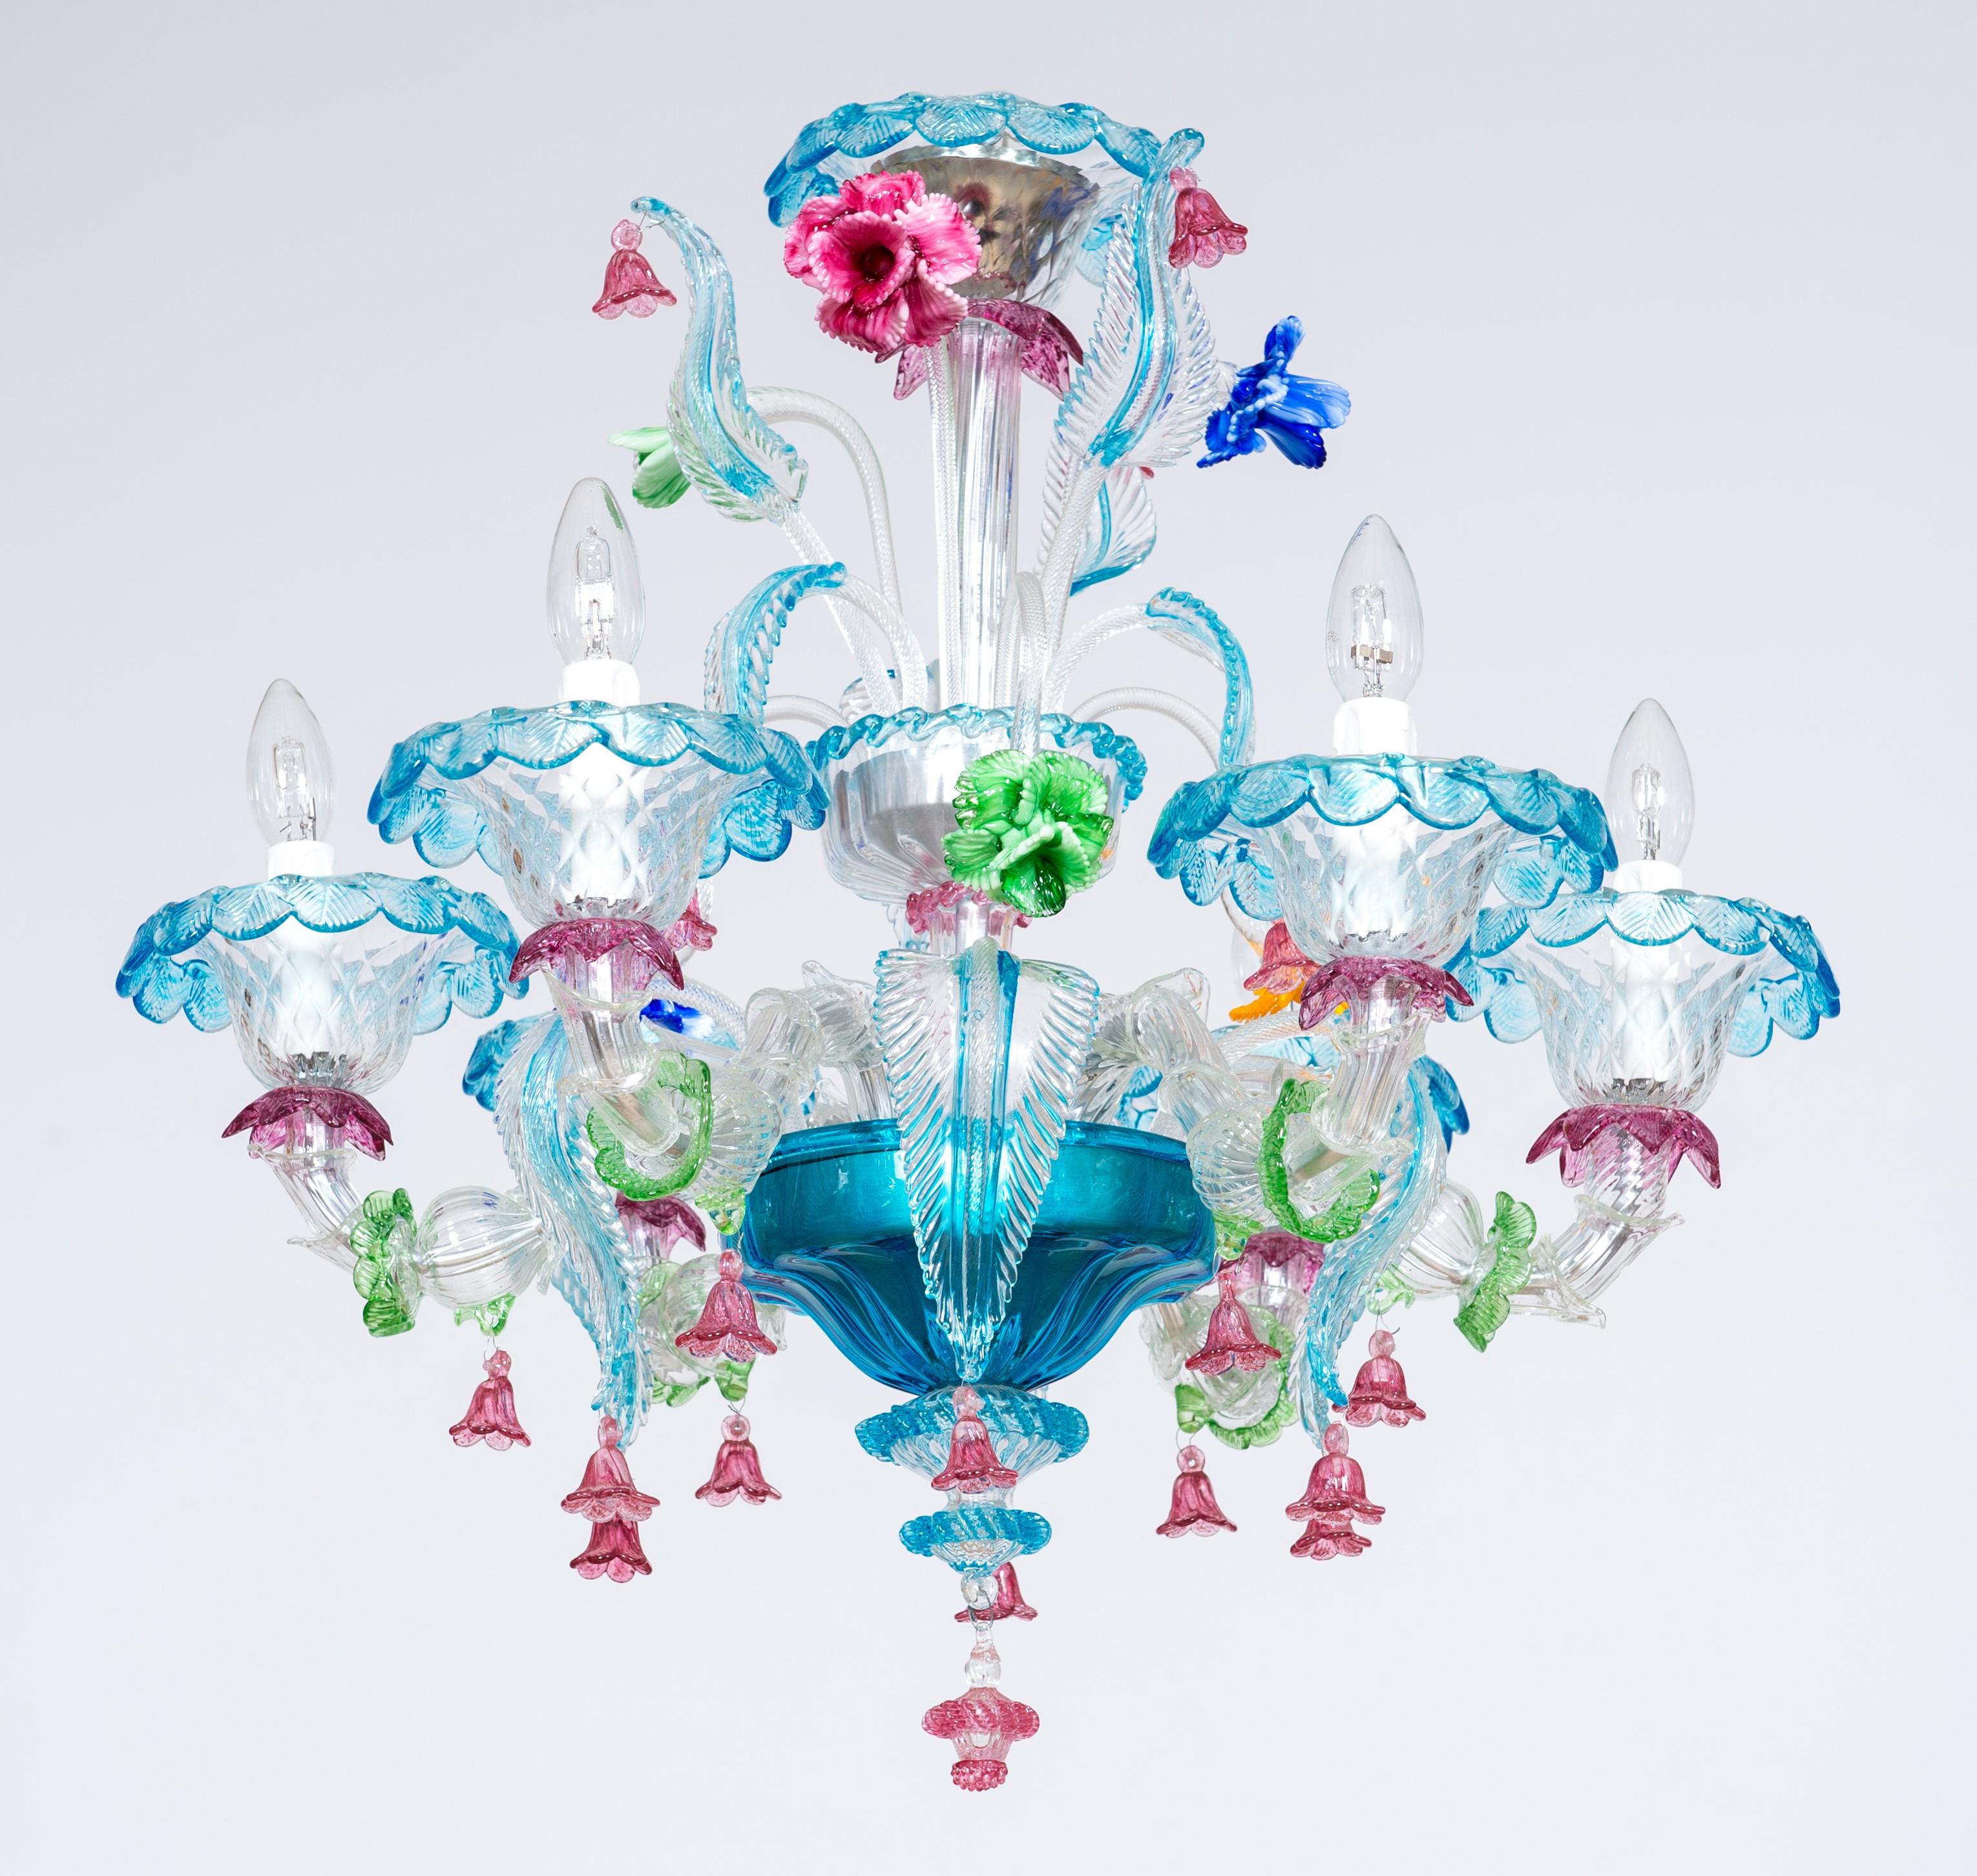 Rezzonico chandelier with Murano glass and glass paste flowers, Italy.
This chandelier is an outstanding example of the best Murano glass art. A garden of leaves and flowers spread out from two cups positioned at different heights. The leaves are